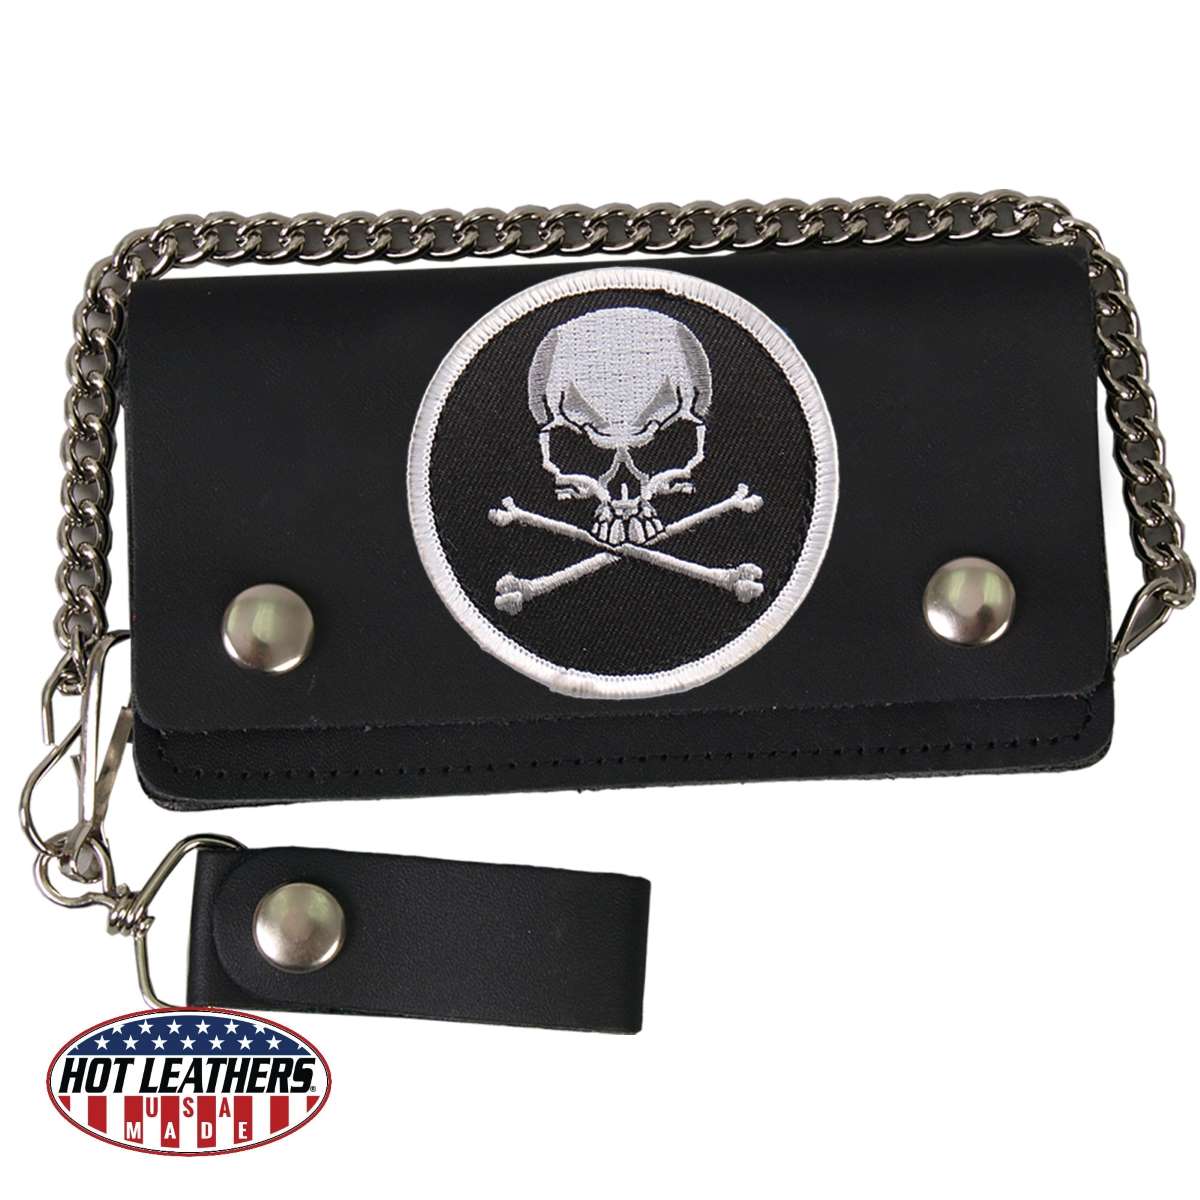 Hot Leathers Premium USA Made Leather Bifold 6" Wallet with Skull and Crossbones Patch WLC5003